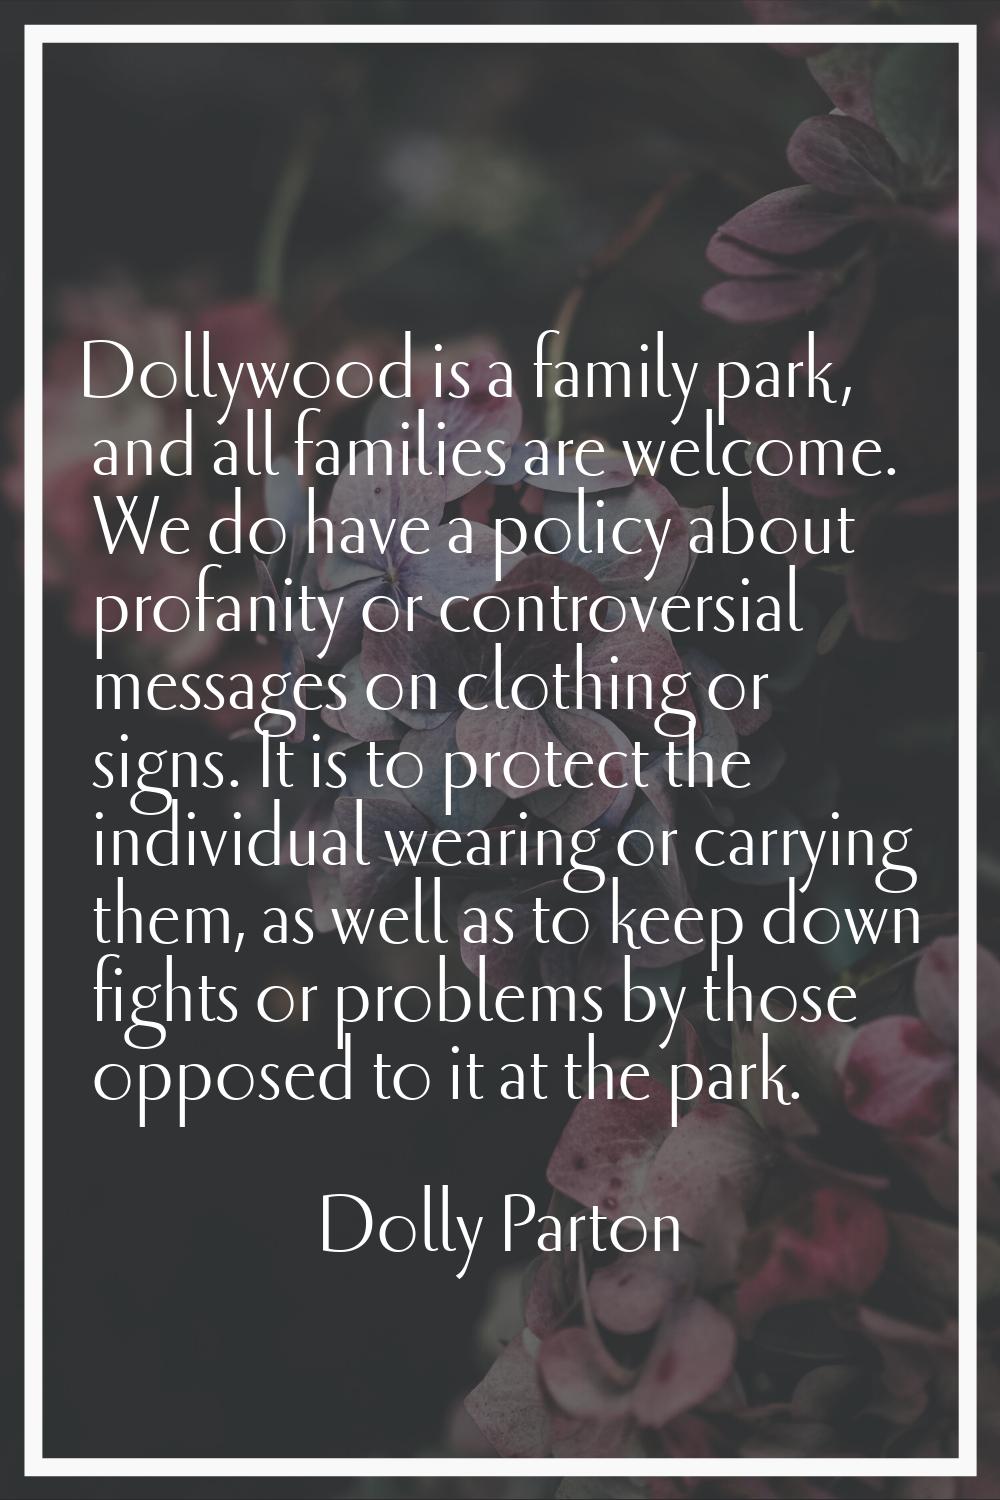 Dollywood is a family park, and all families are welcome. We do have a policy about profanity or co